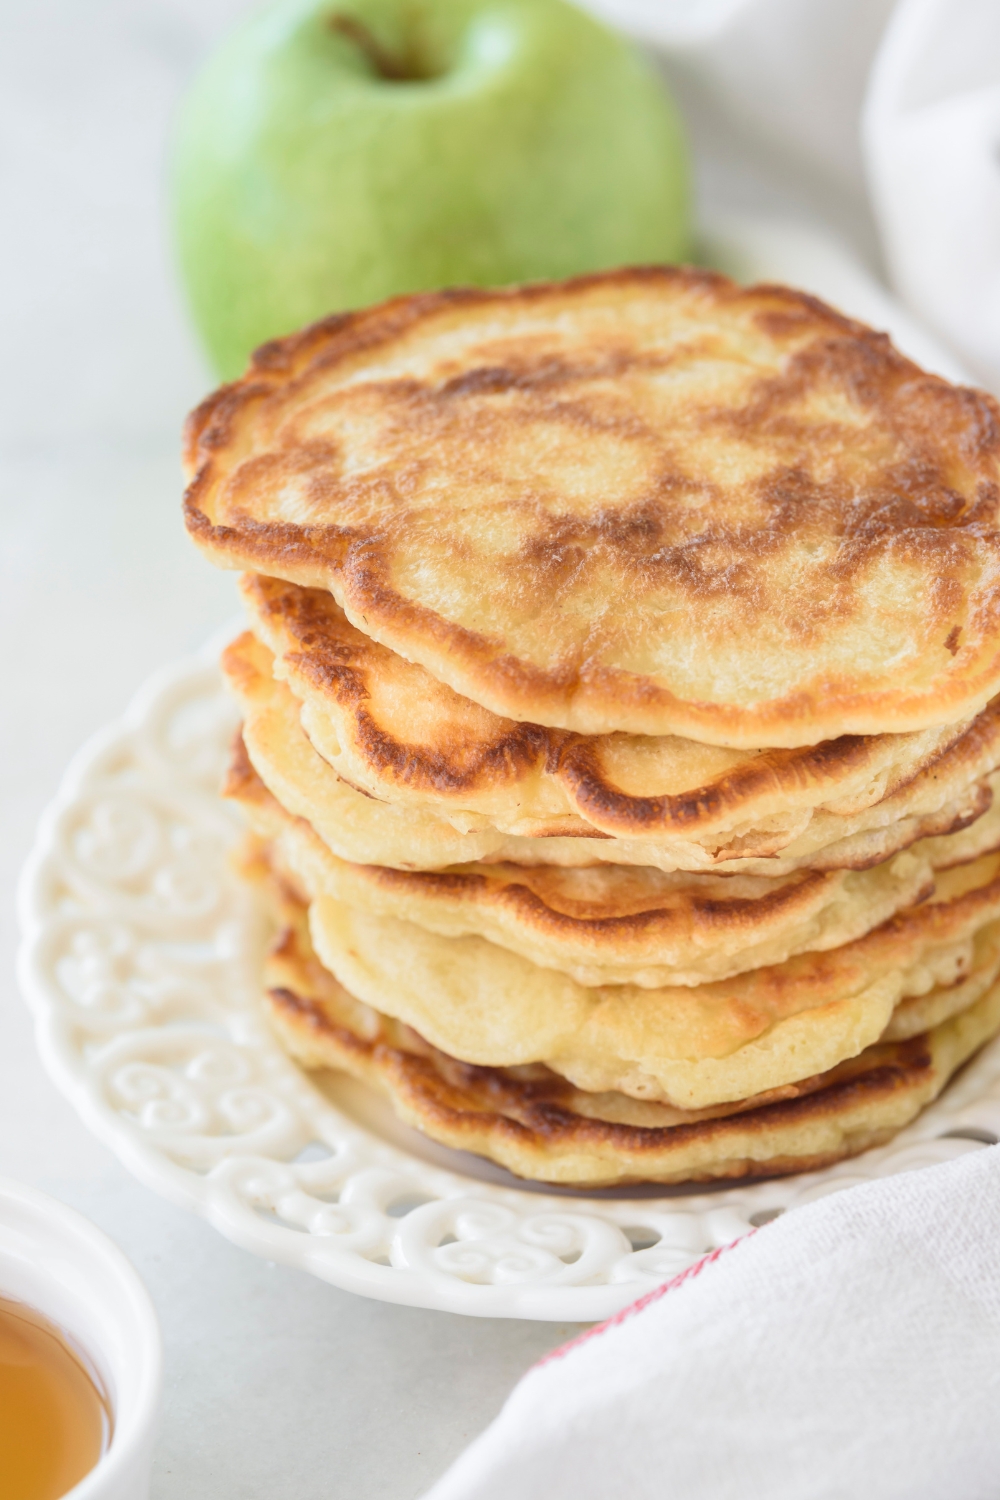 A stack of golden brown pancakes on a white plate.